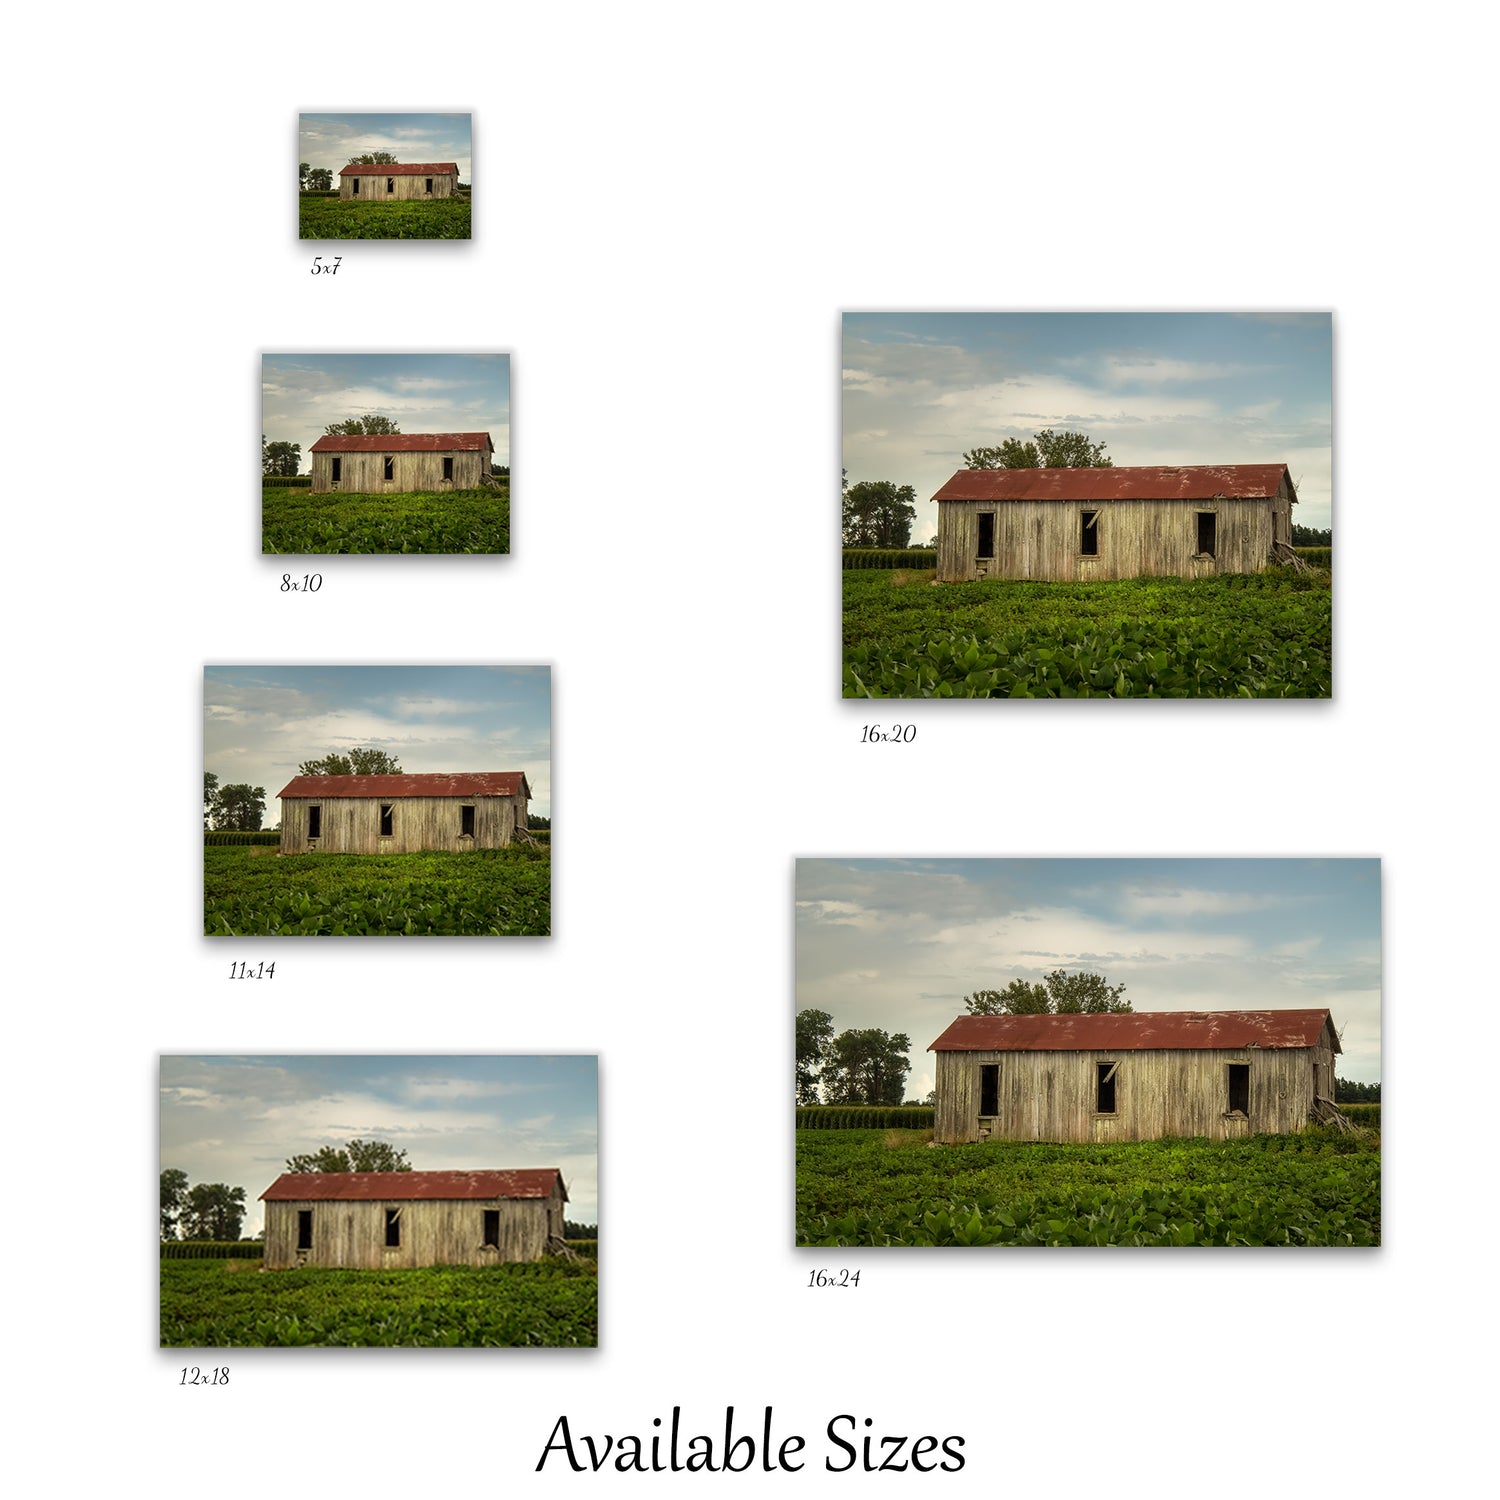 Visual representation of sharecropper shack wall art print sizes available: 5x7, 8x10, 11x14, 12x18, 16x20, and 16x24.